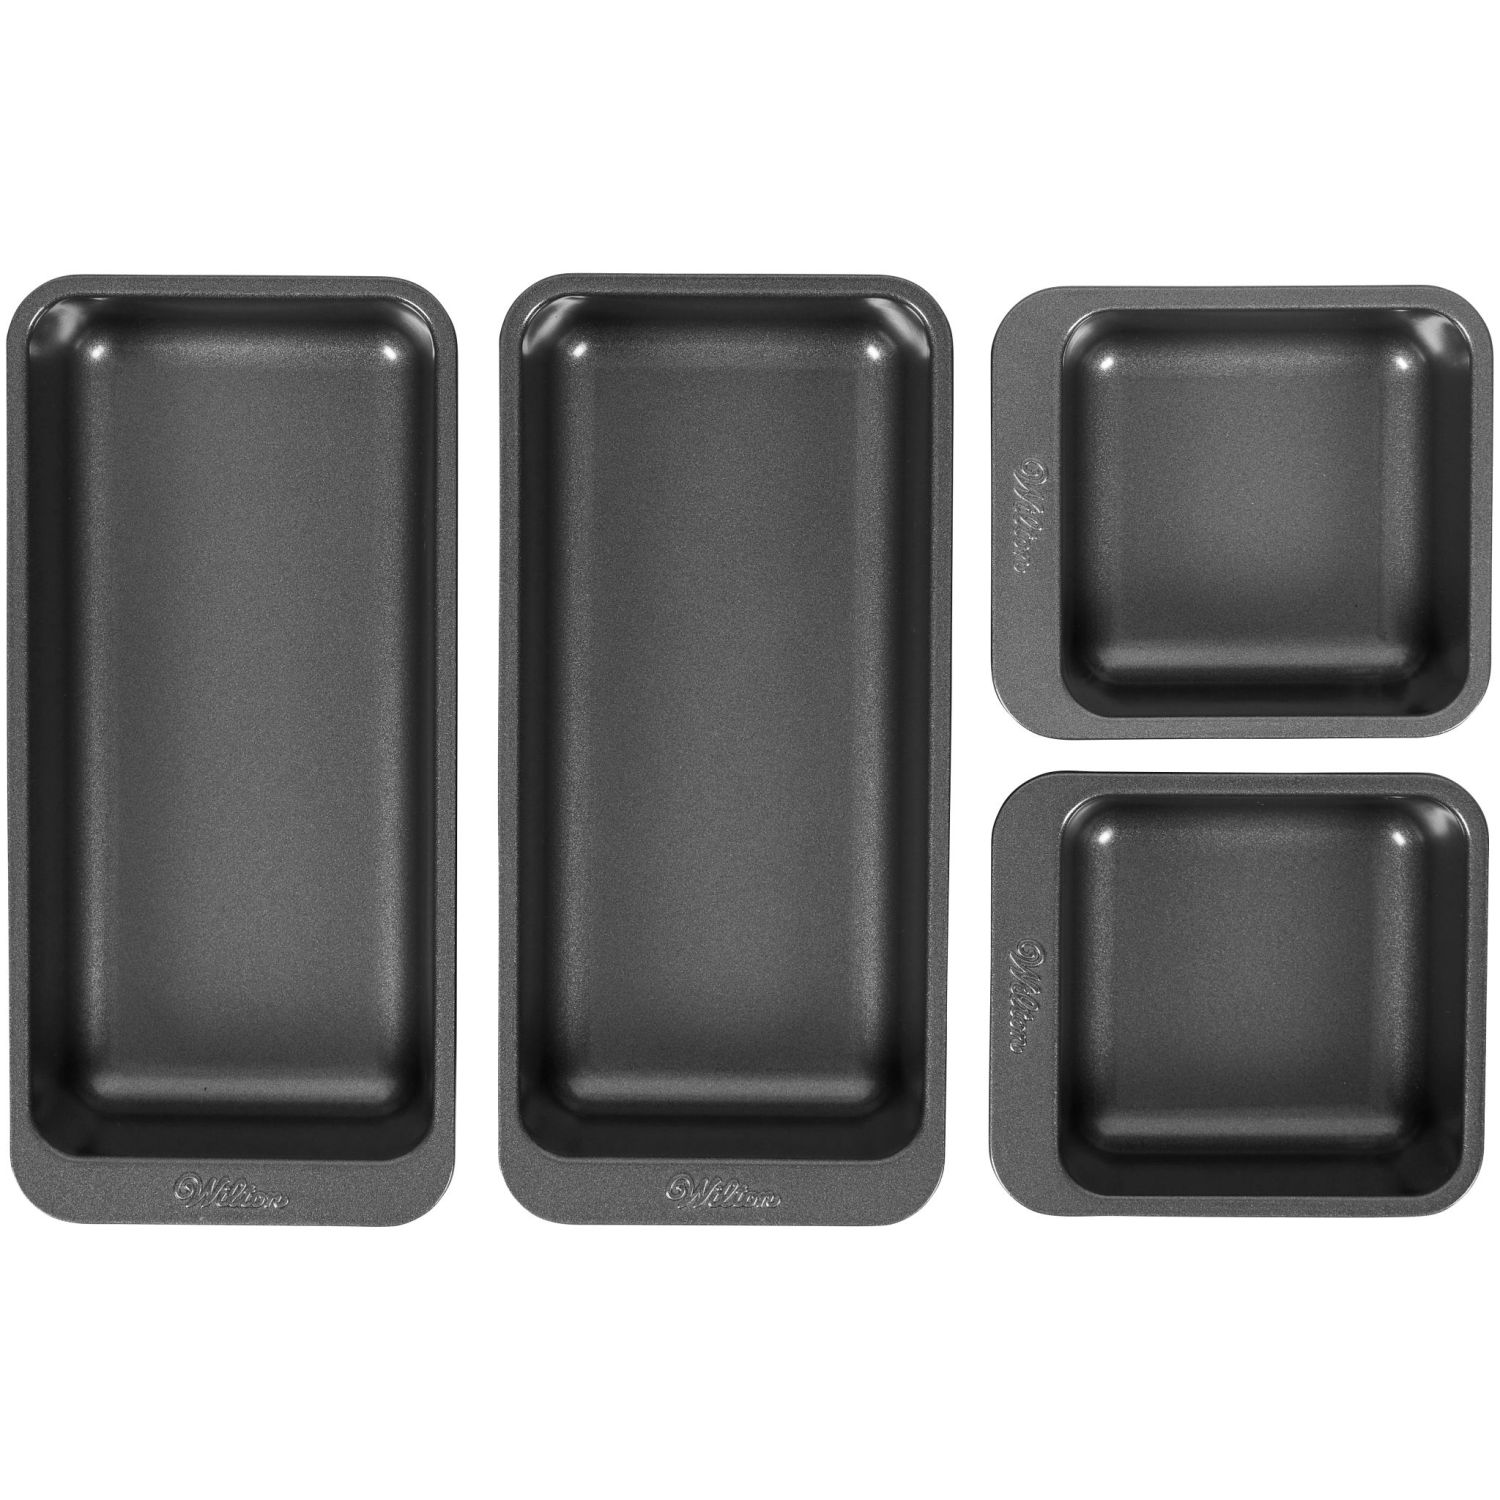  Wilton Perfect Results Nonstick Oblong Cake Pan, 13 by